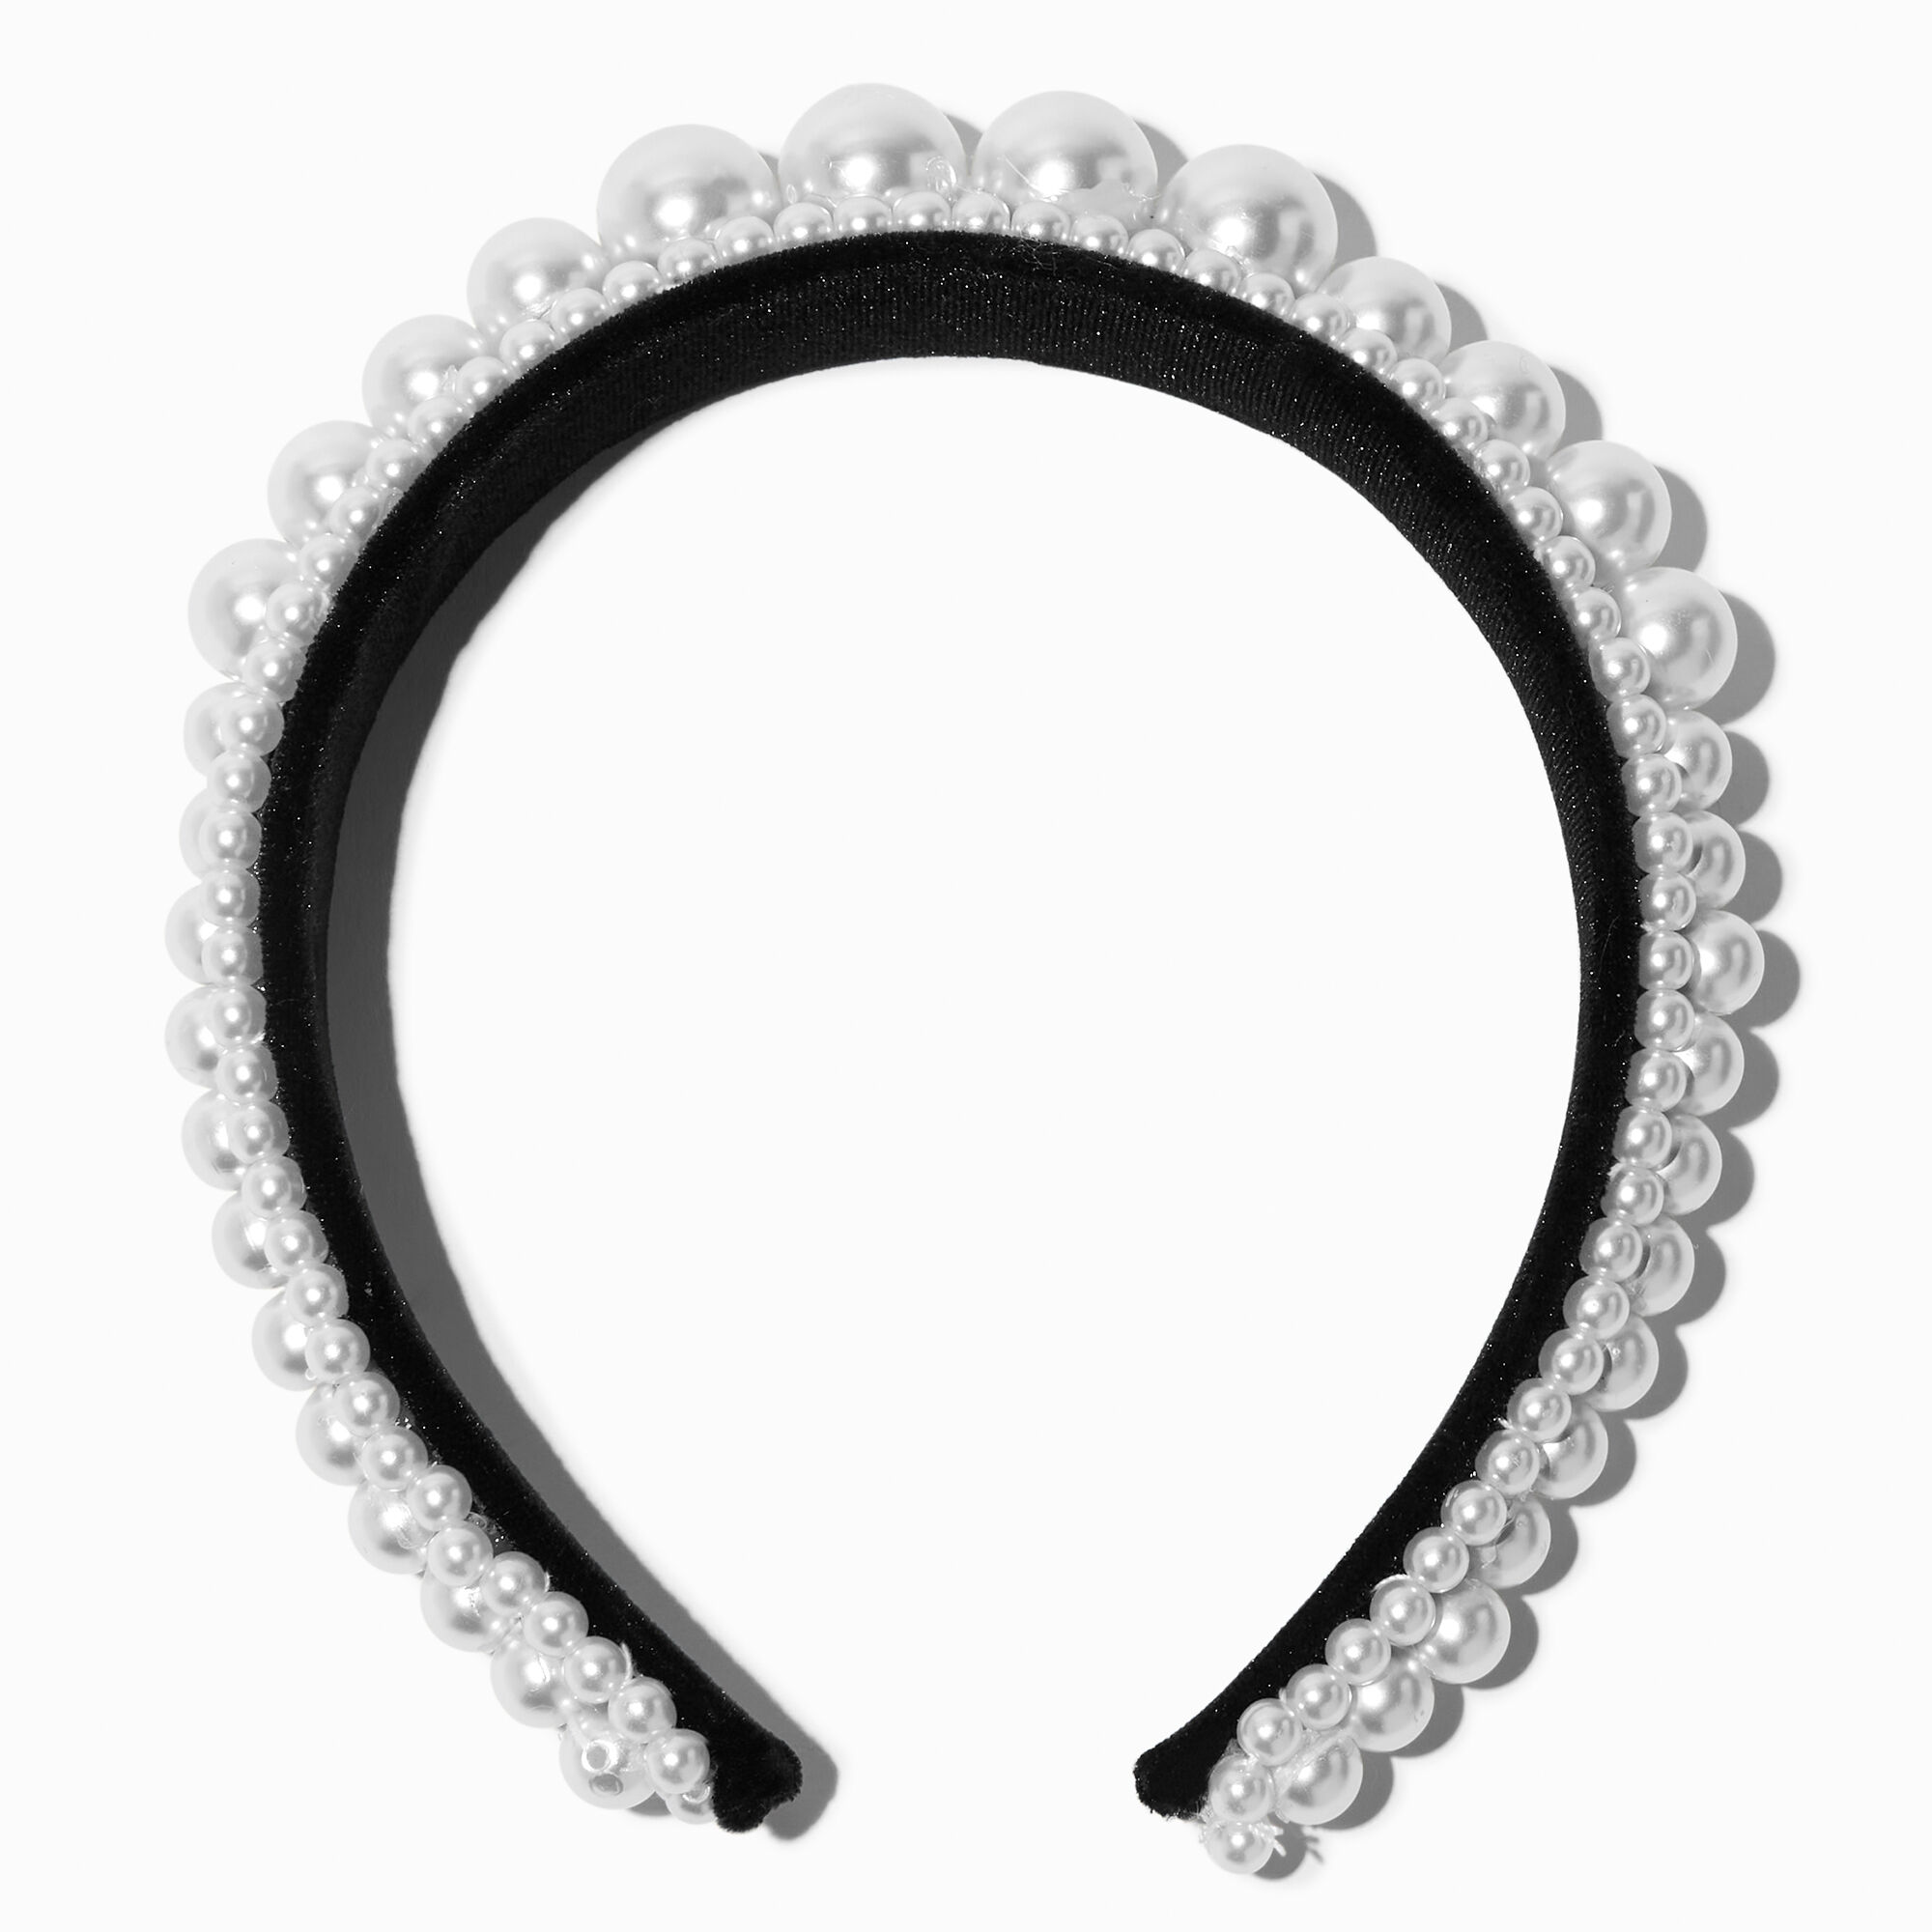 View Claires Pearl Embellished Headband Black information